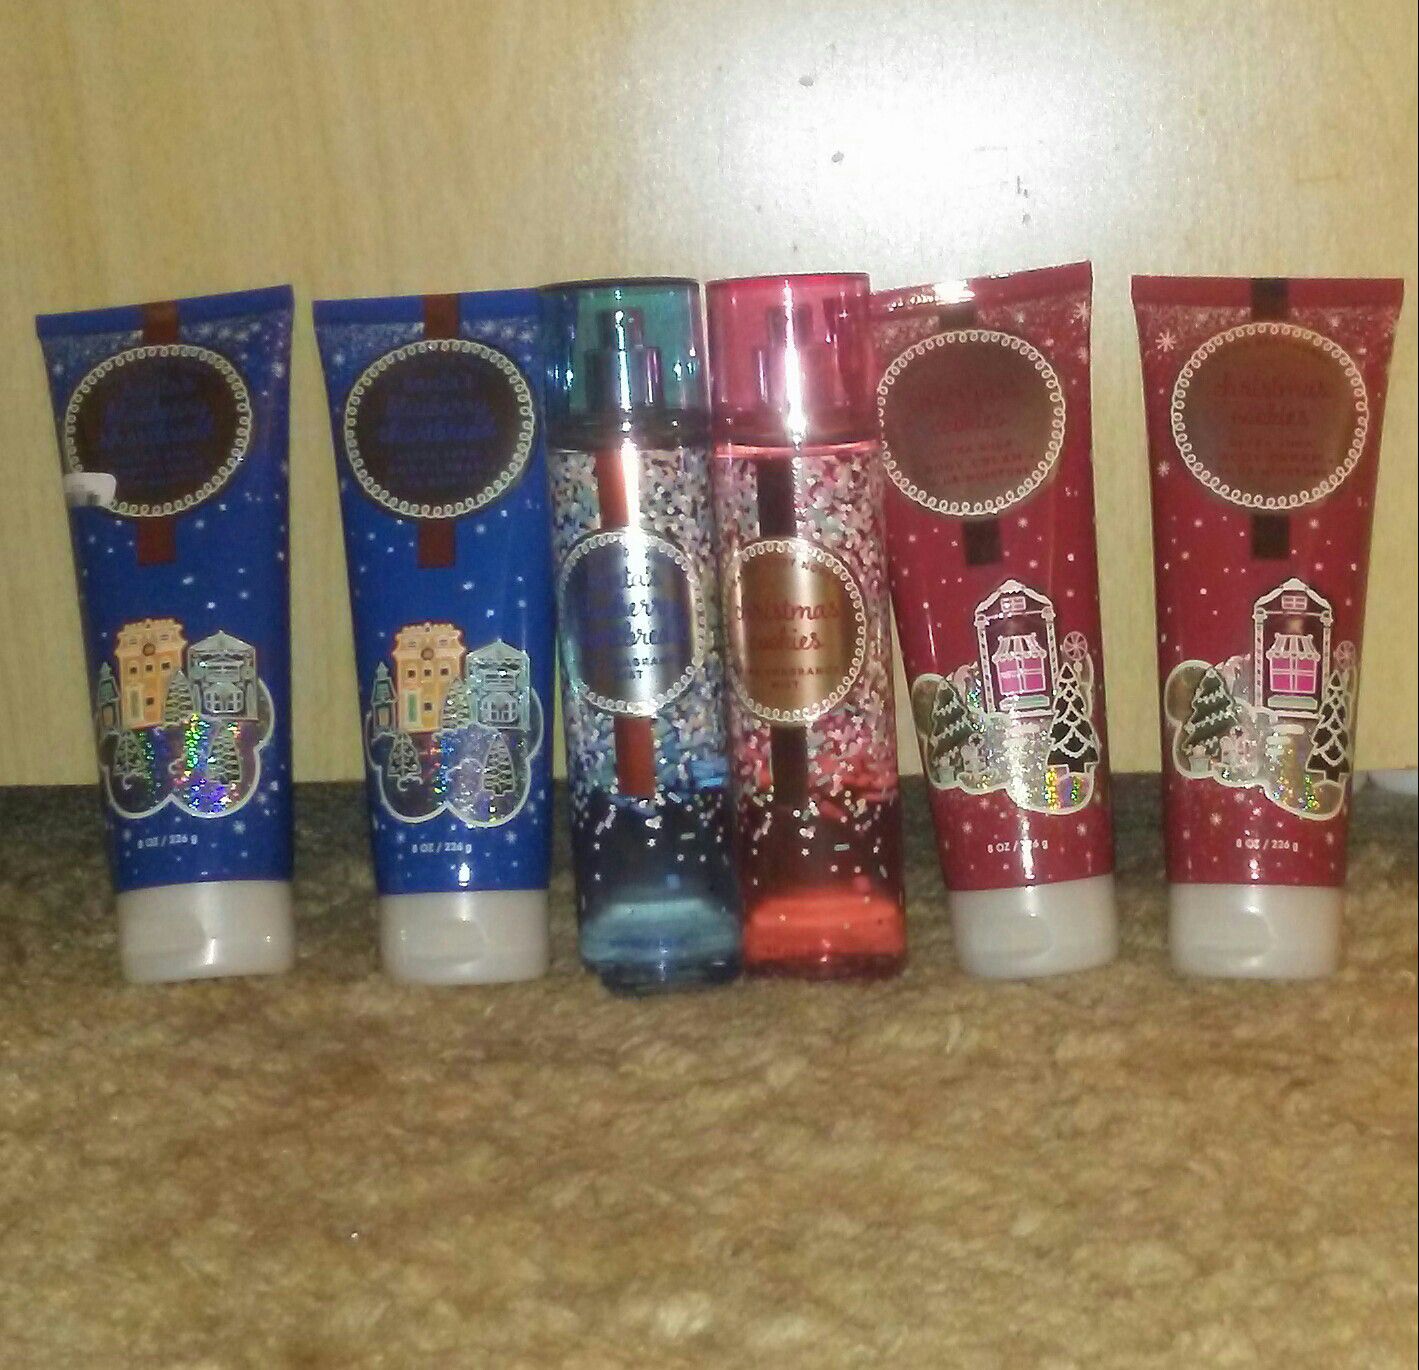 Brand New Christmas Set of Bath & Body Works Products!